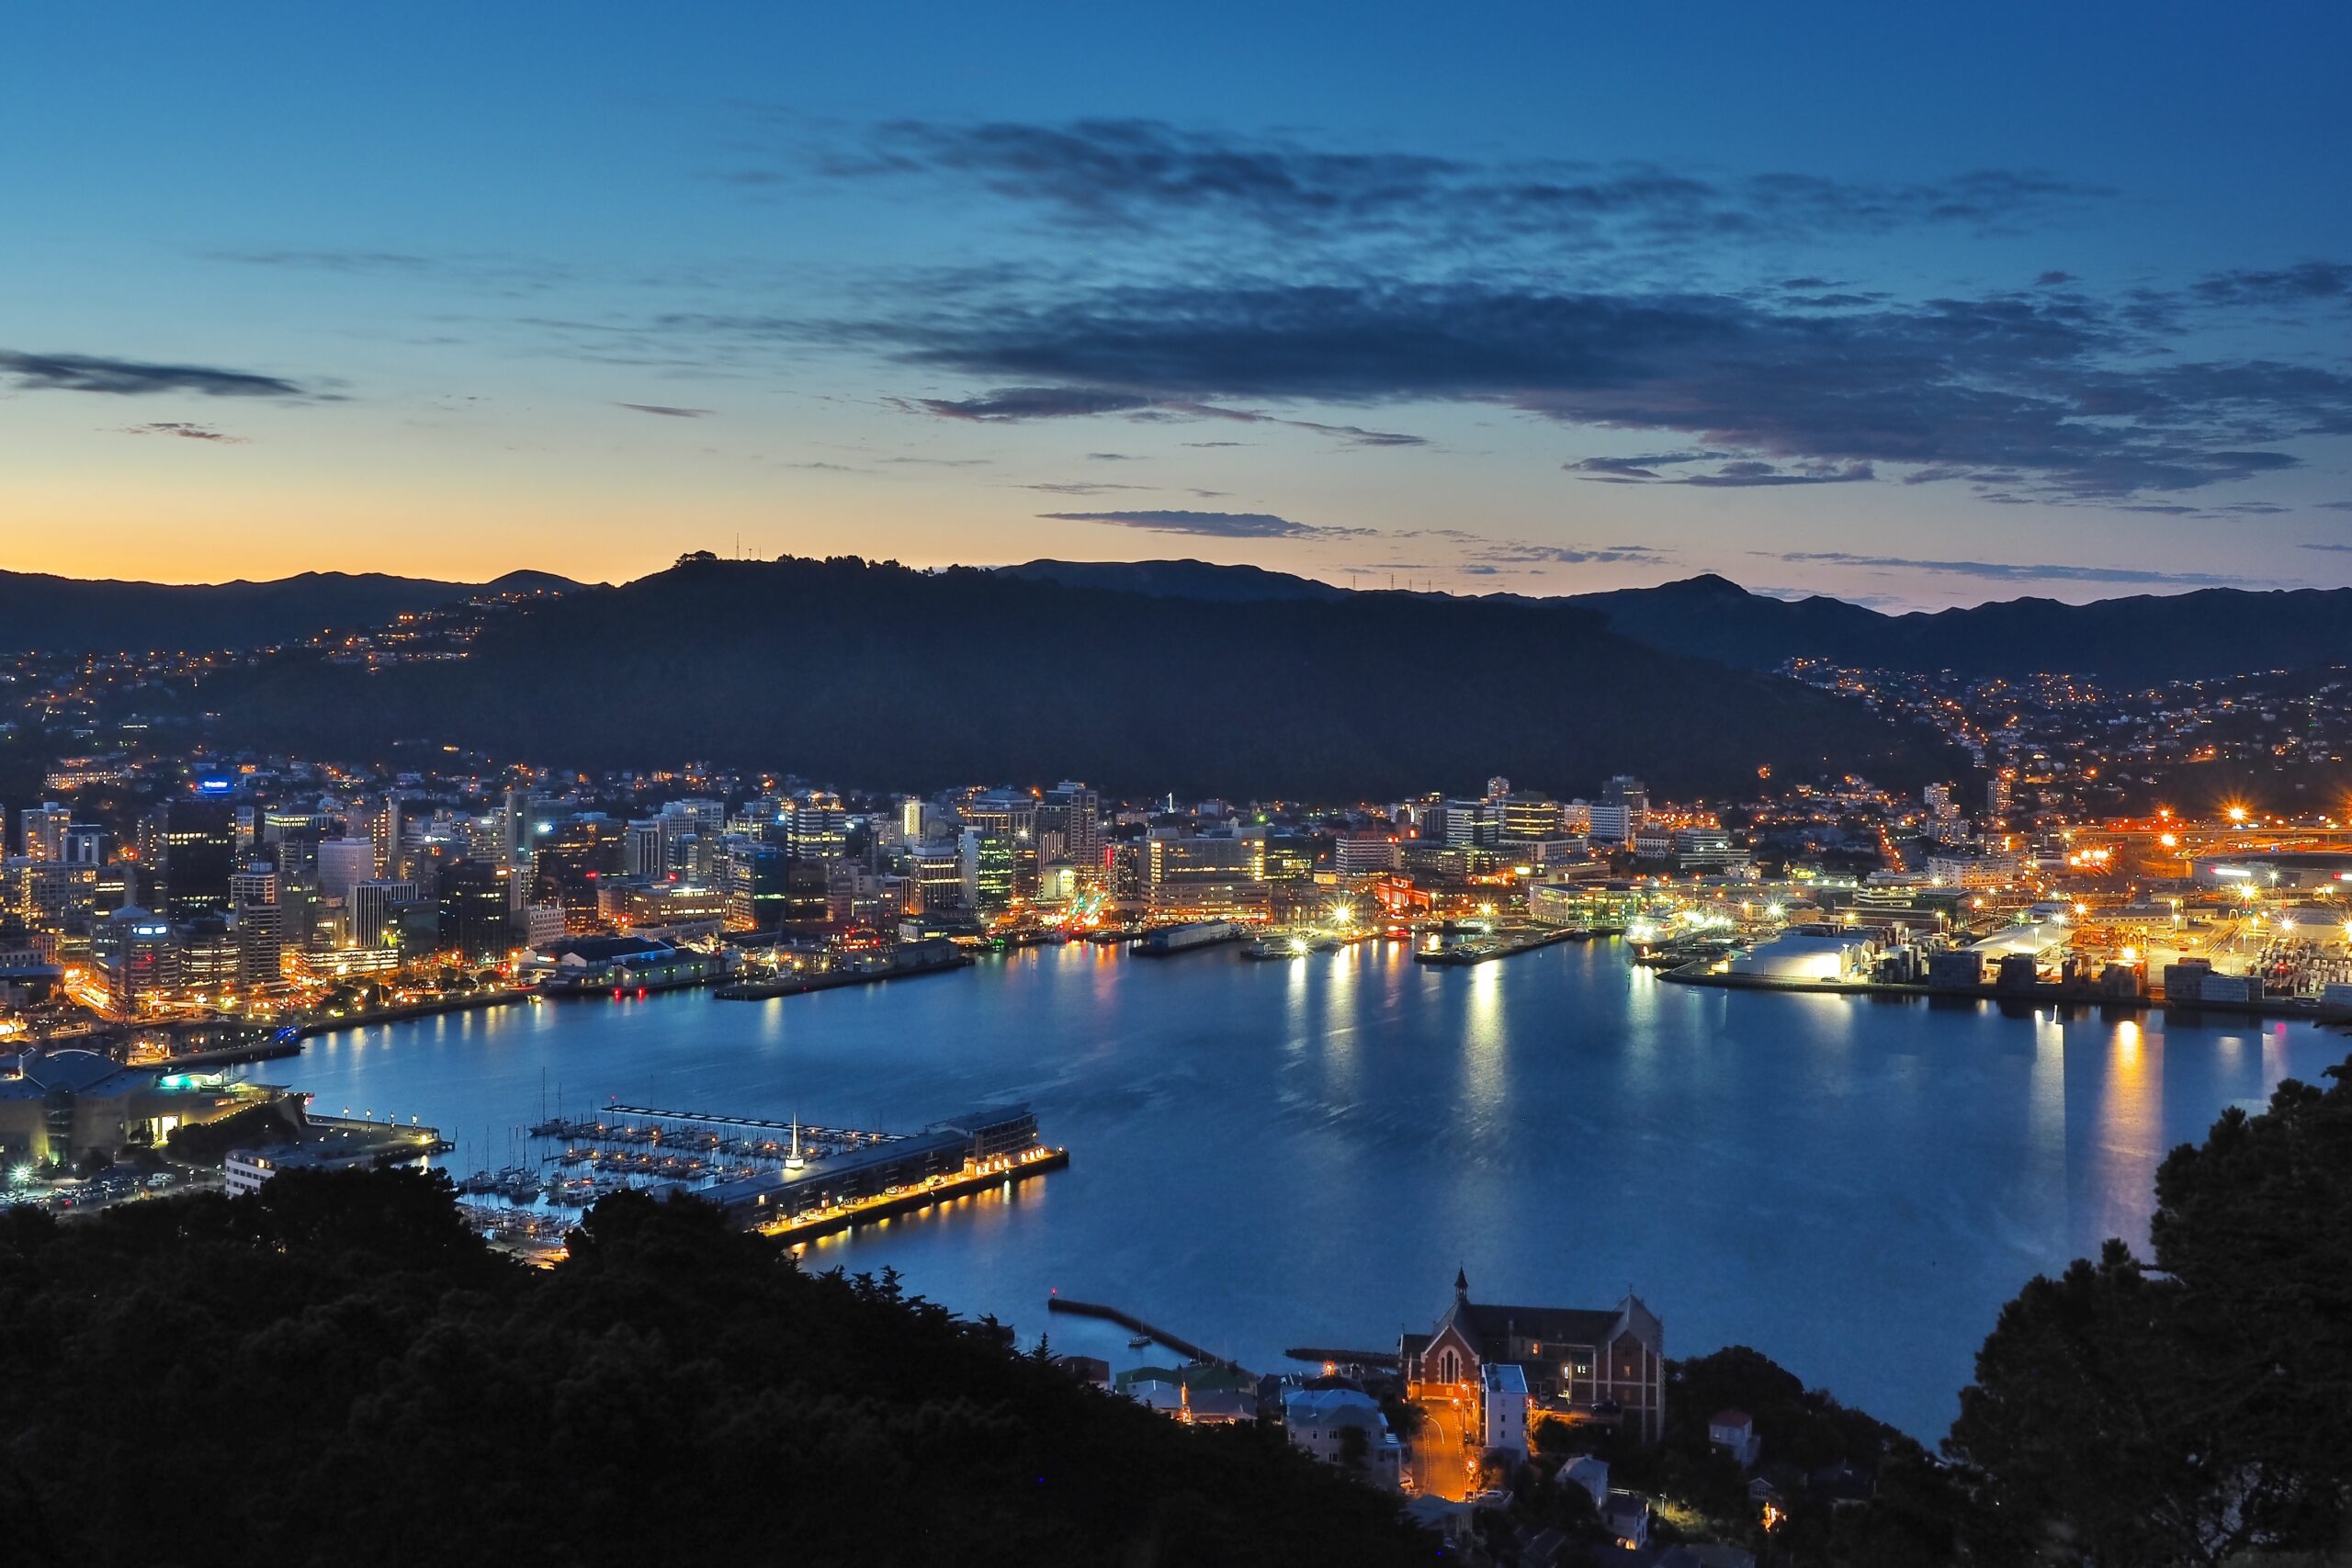 View of city of Wellington, New Zealand at night, taken from Mount Victoria